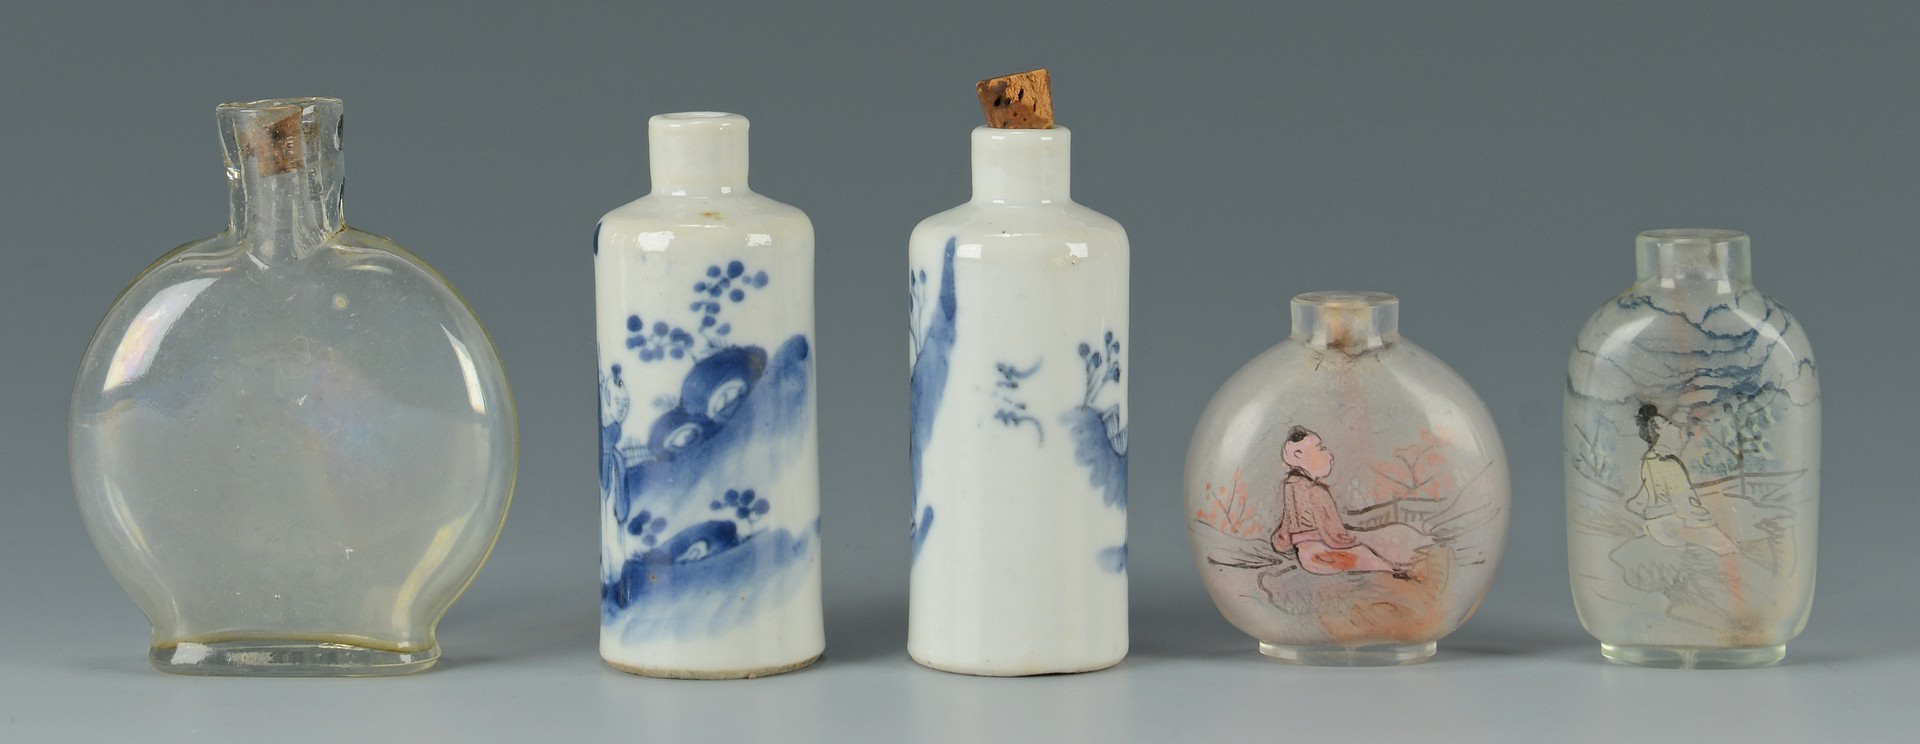 Lot 783: 4 Chinese Snuff Bottles + 1 other